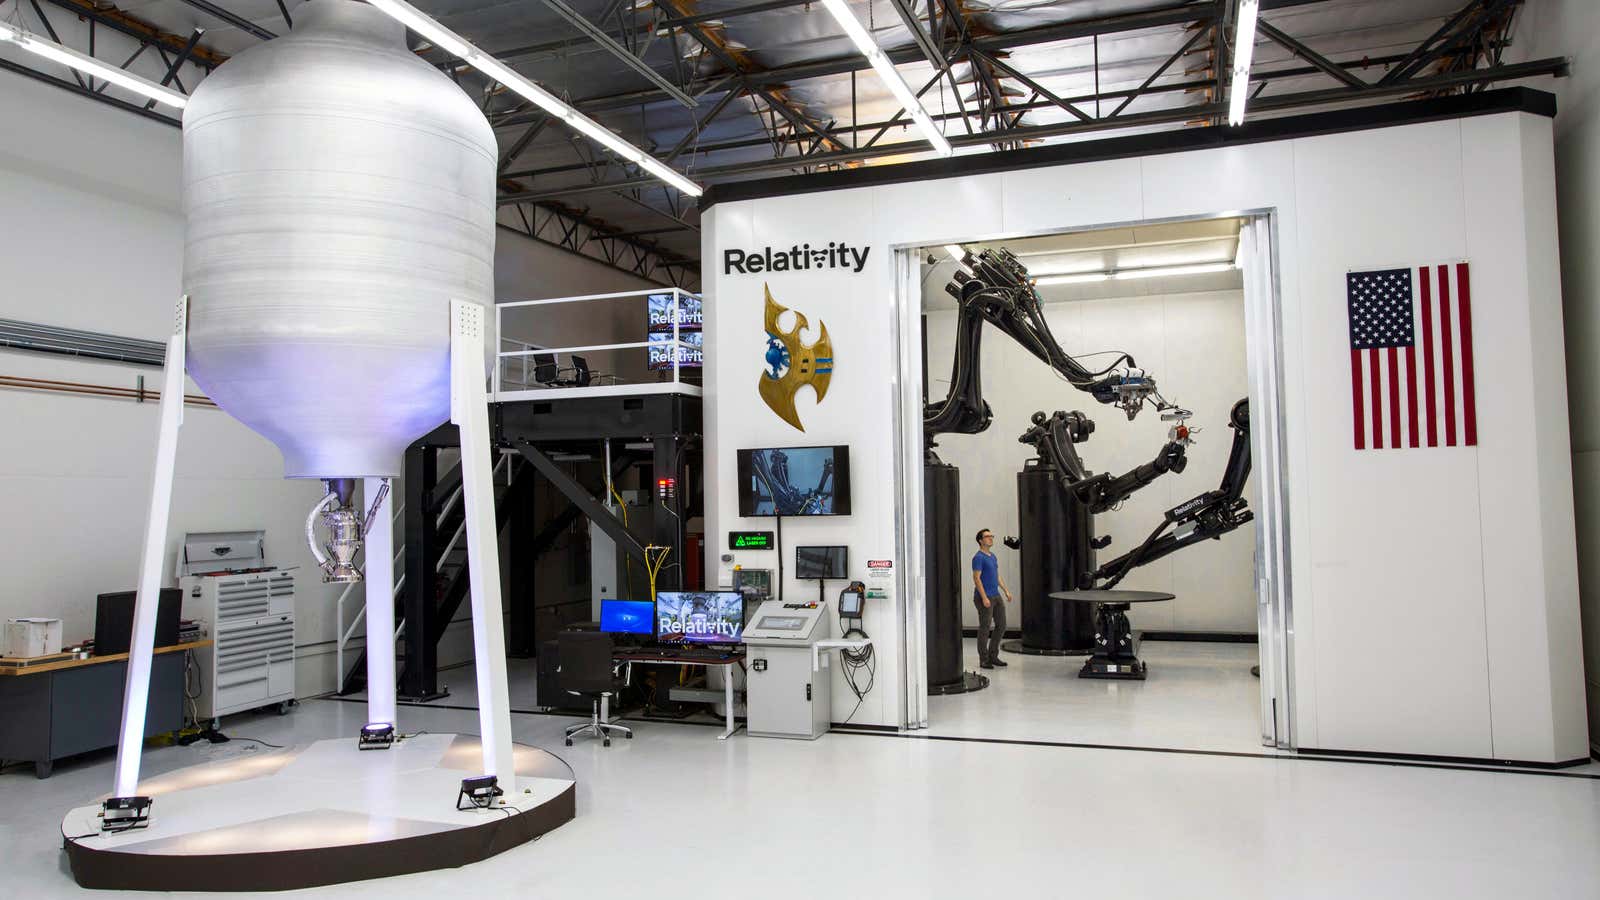 Relativity’s additive manufacturing workshop, with CEO for scale.